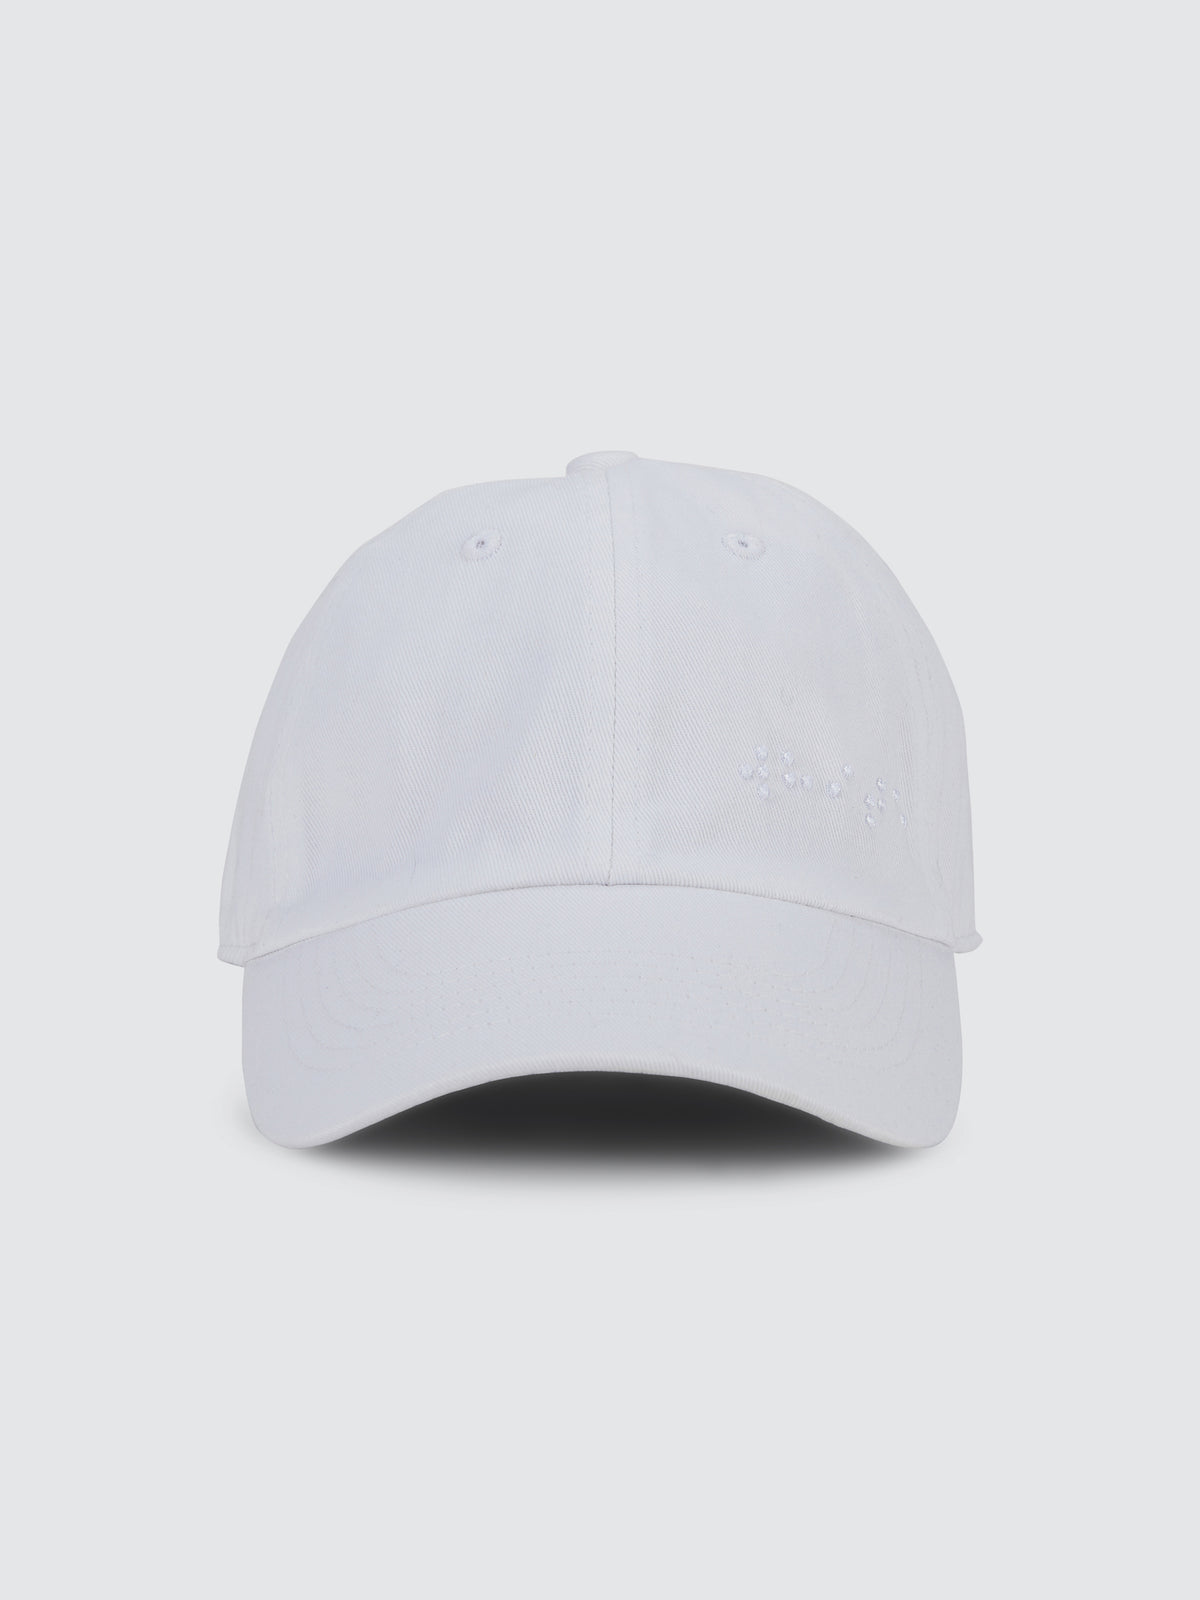 Two Blind Brothers - Gift Soft Baseball Cap White